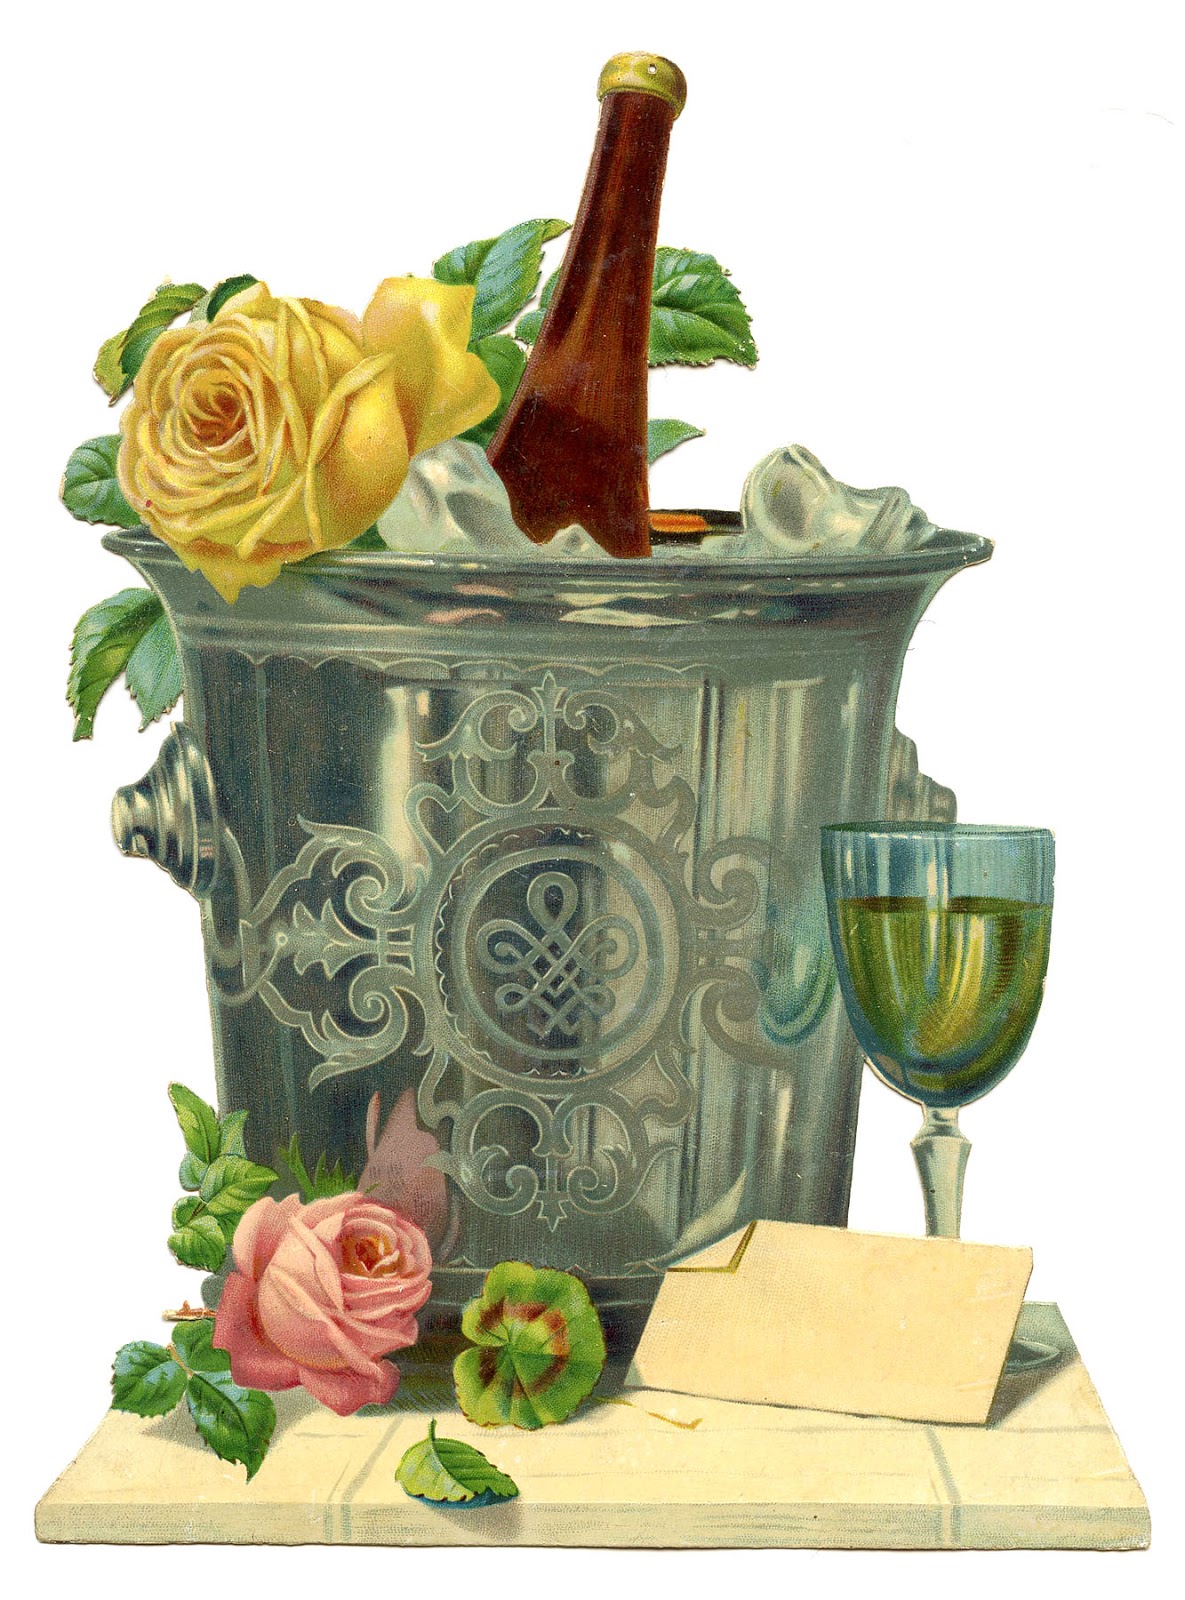 champagne clipart bucket